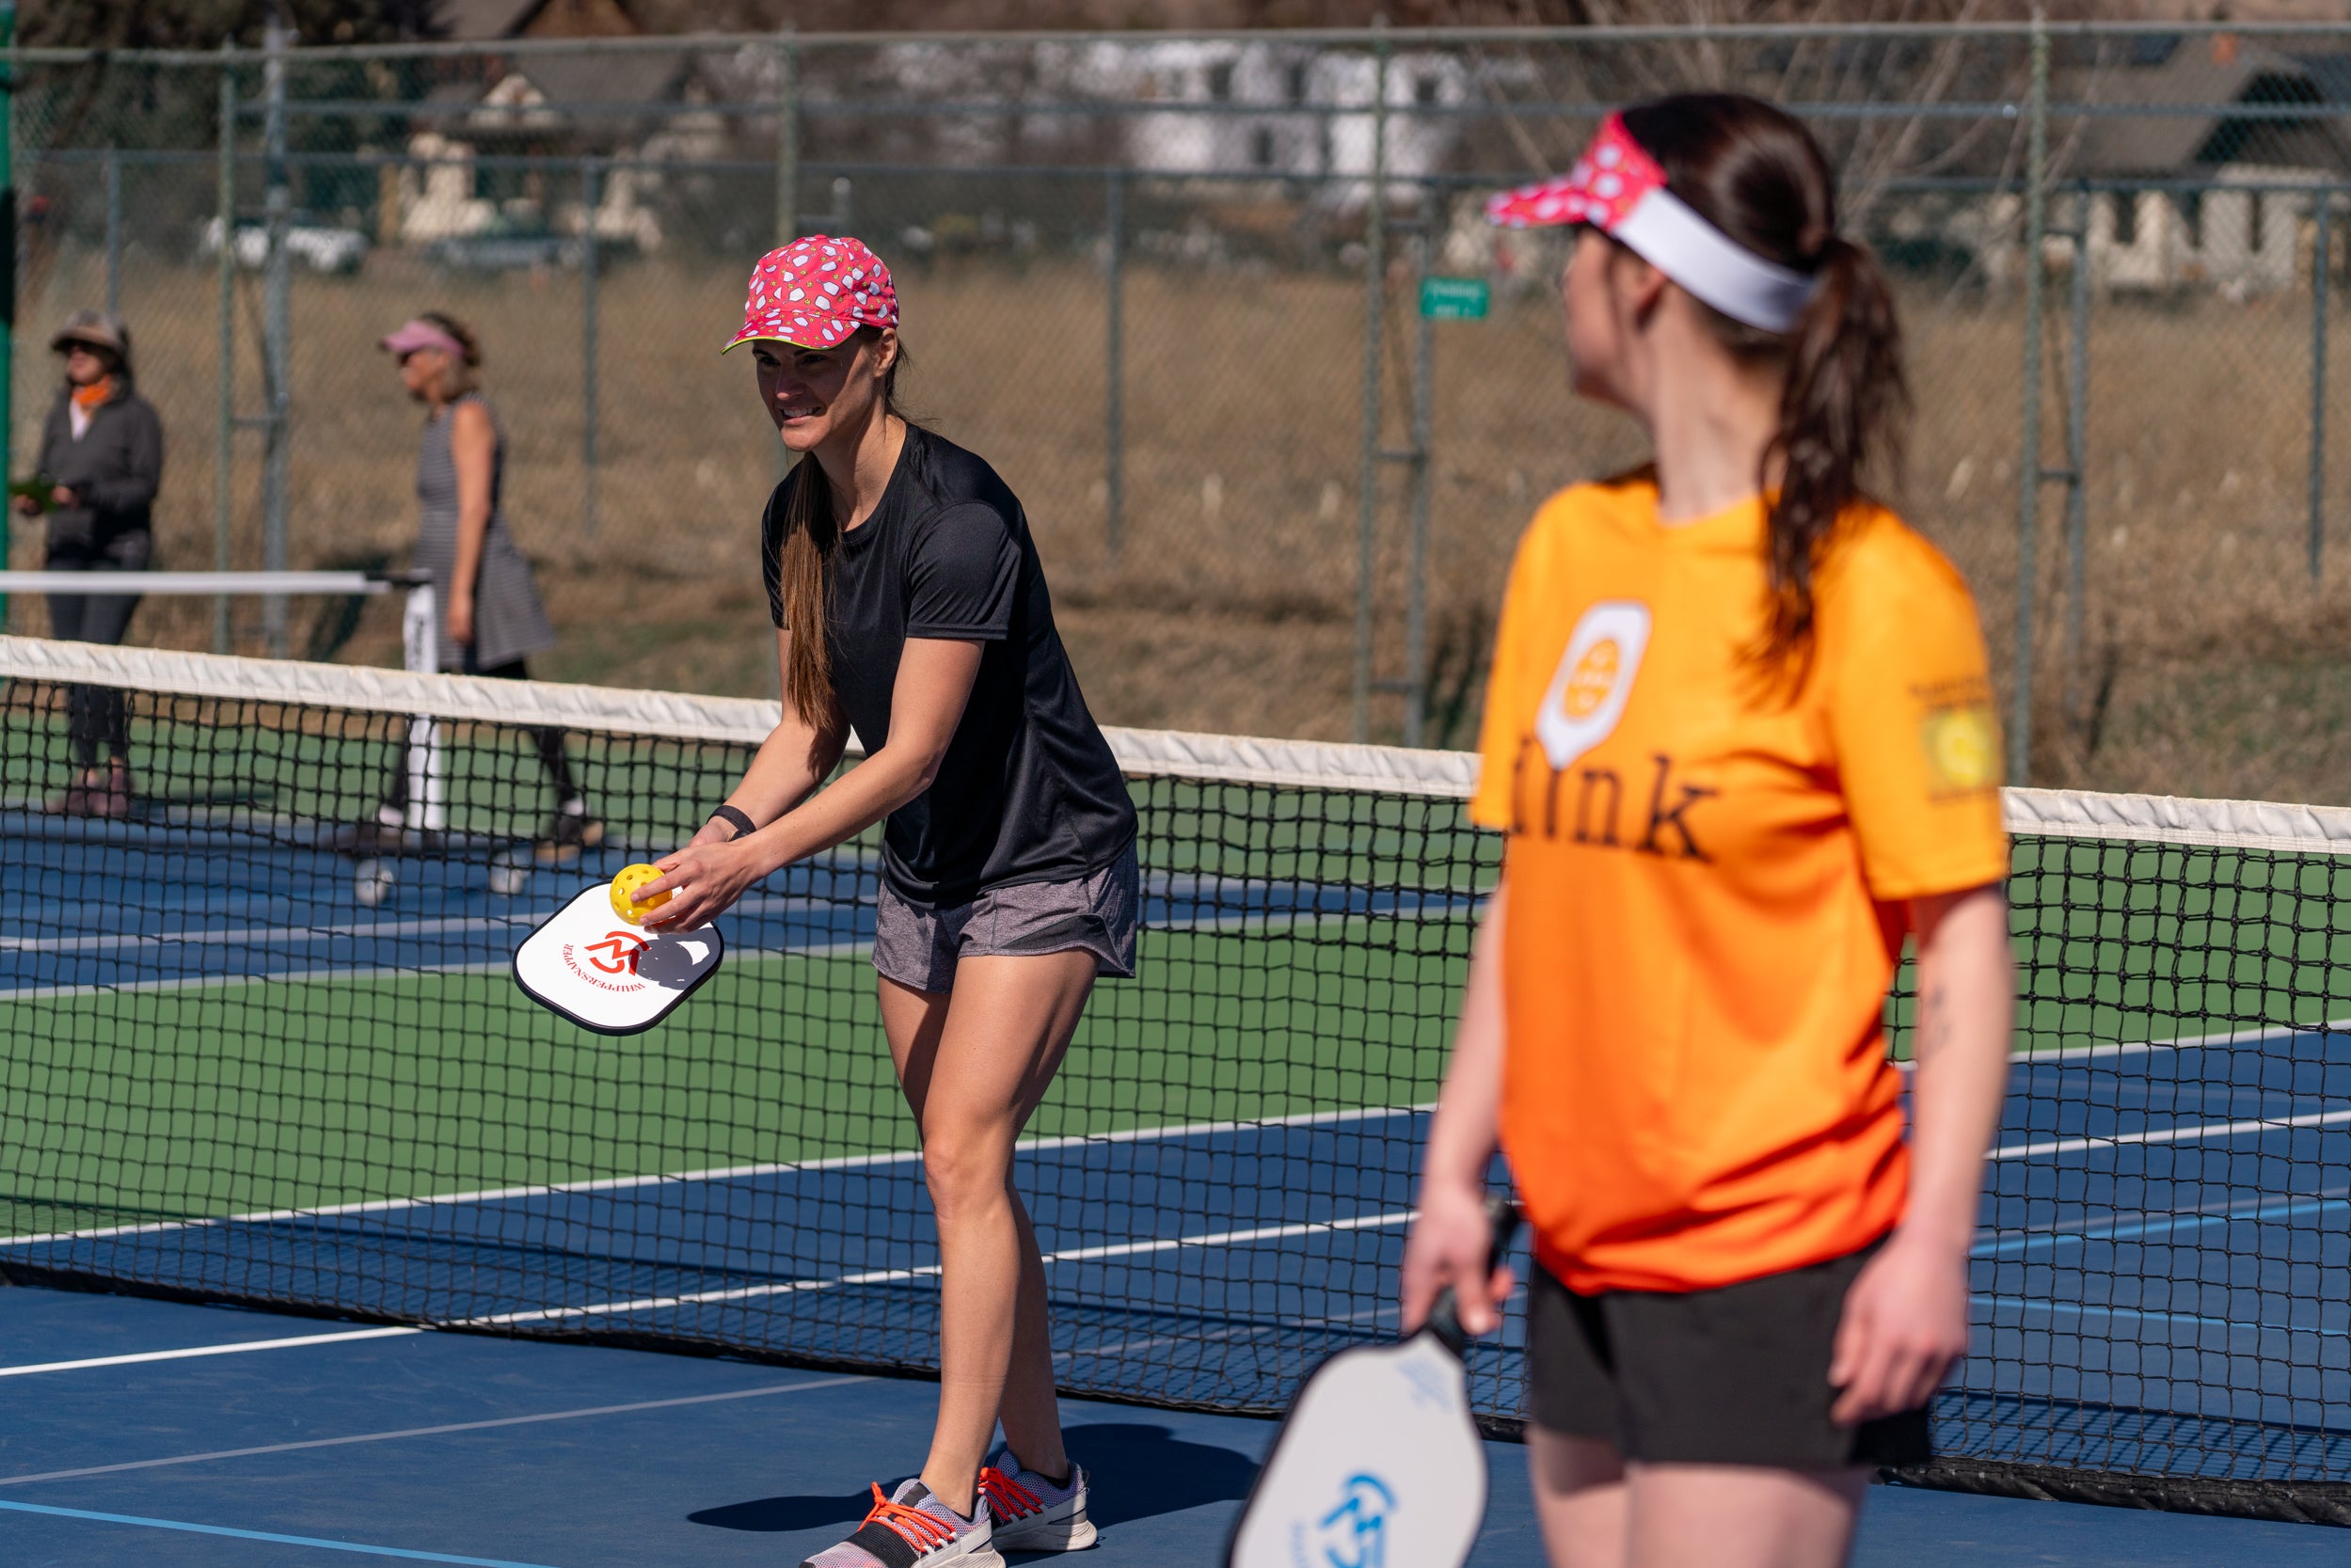 Features a Headsweats Performance Hat and a Performance Visor with Pickleball Paddles design